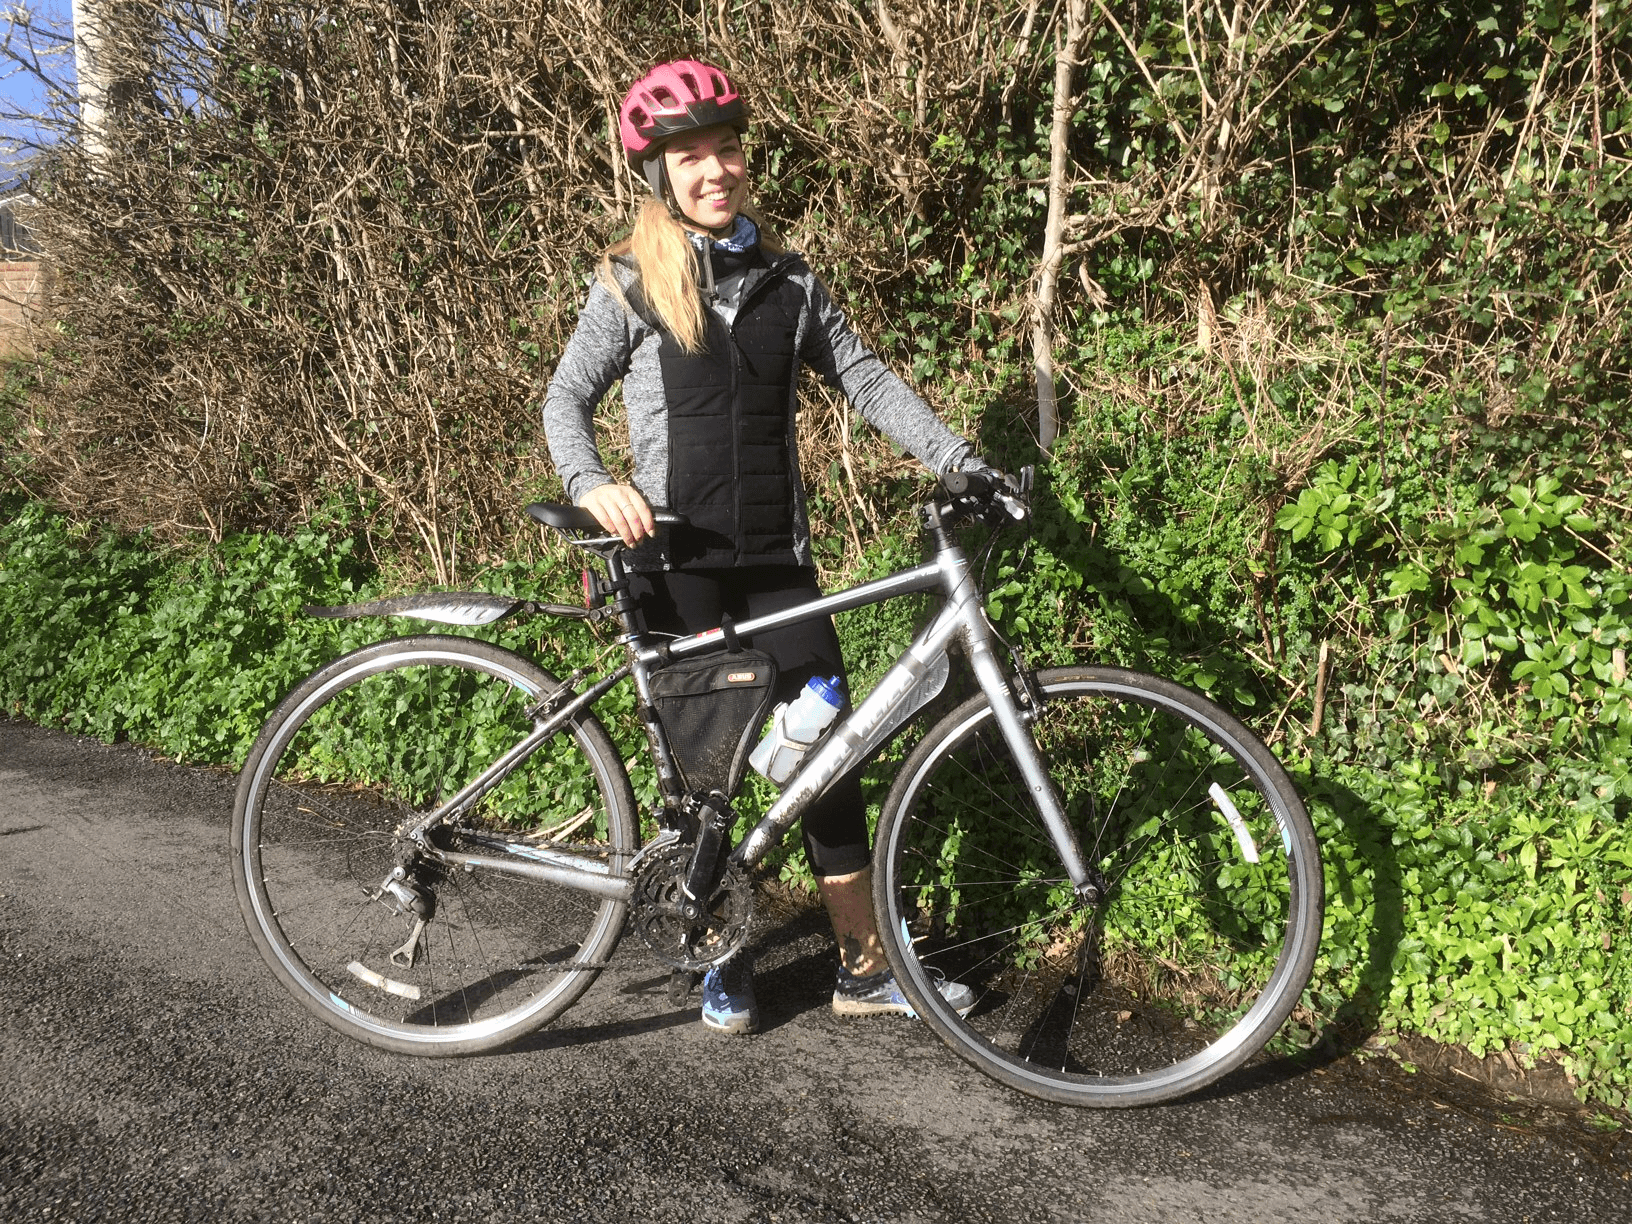 Heather Woolner poses outside with her bicycle as she takes on a cycling endurance challenge.